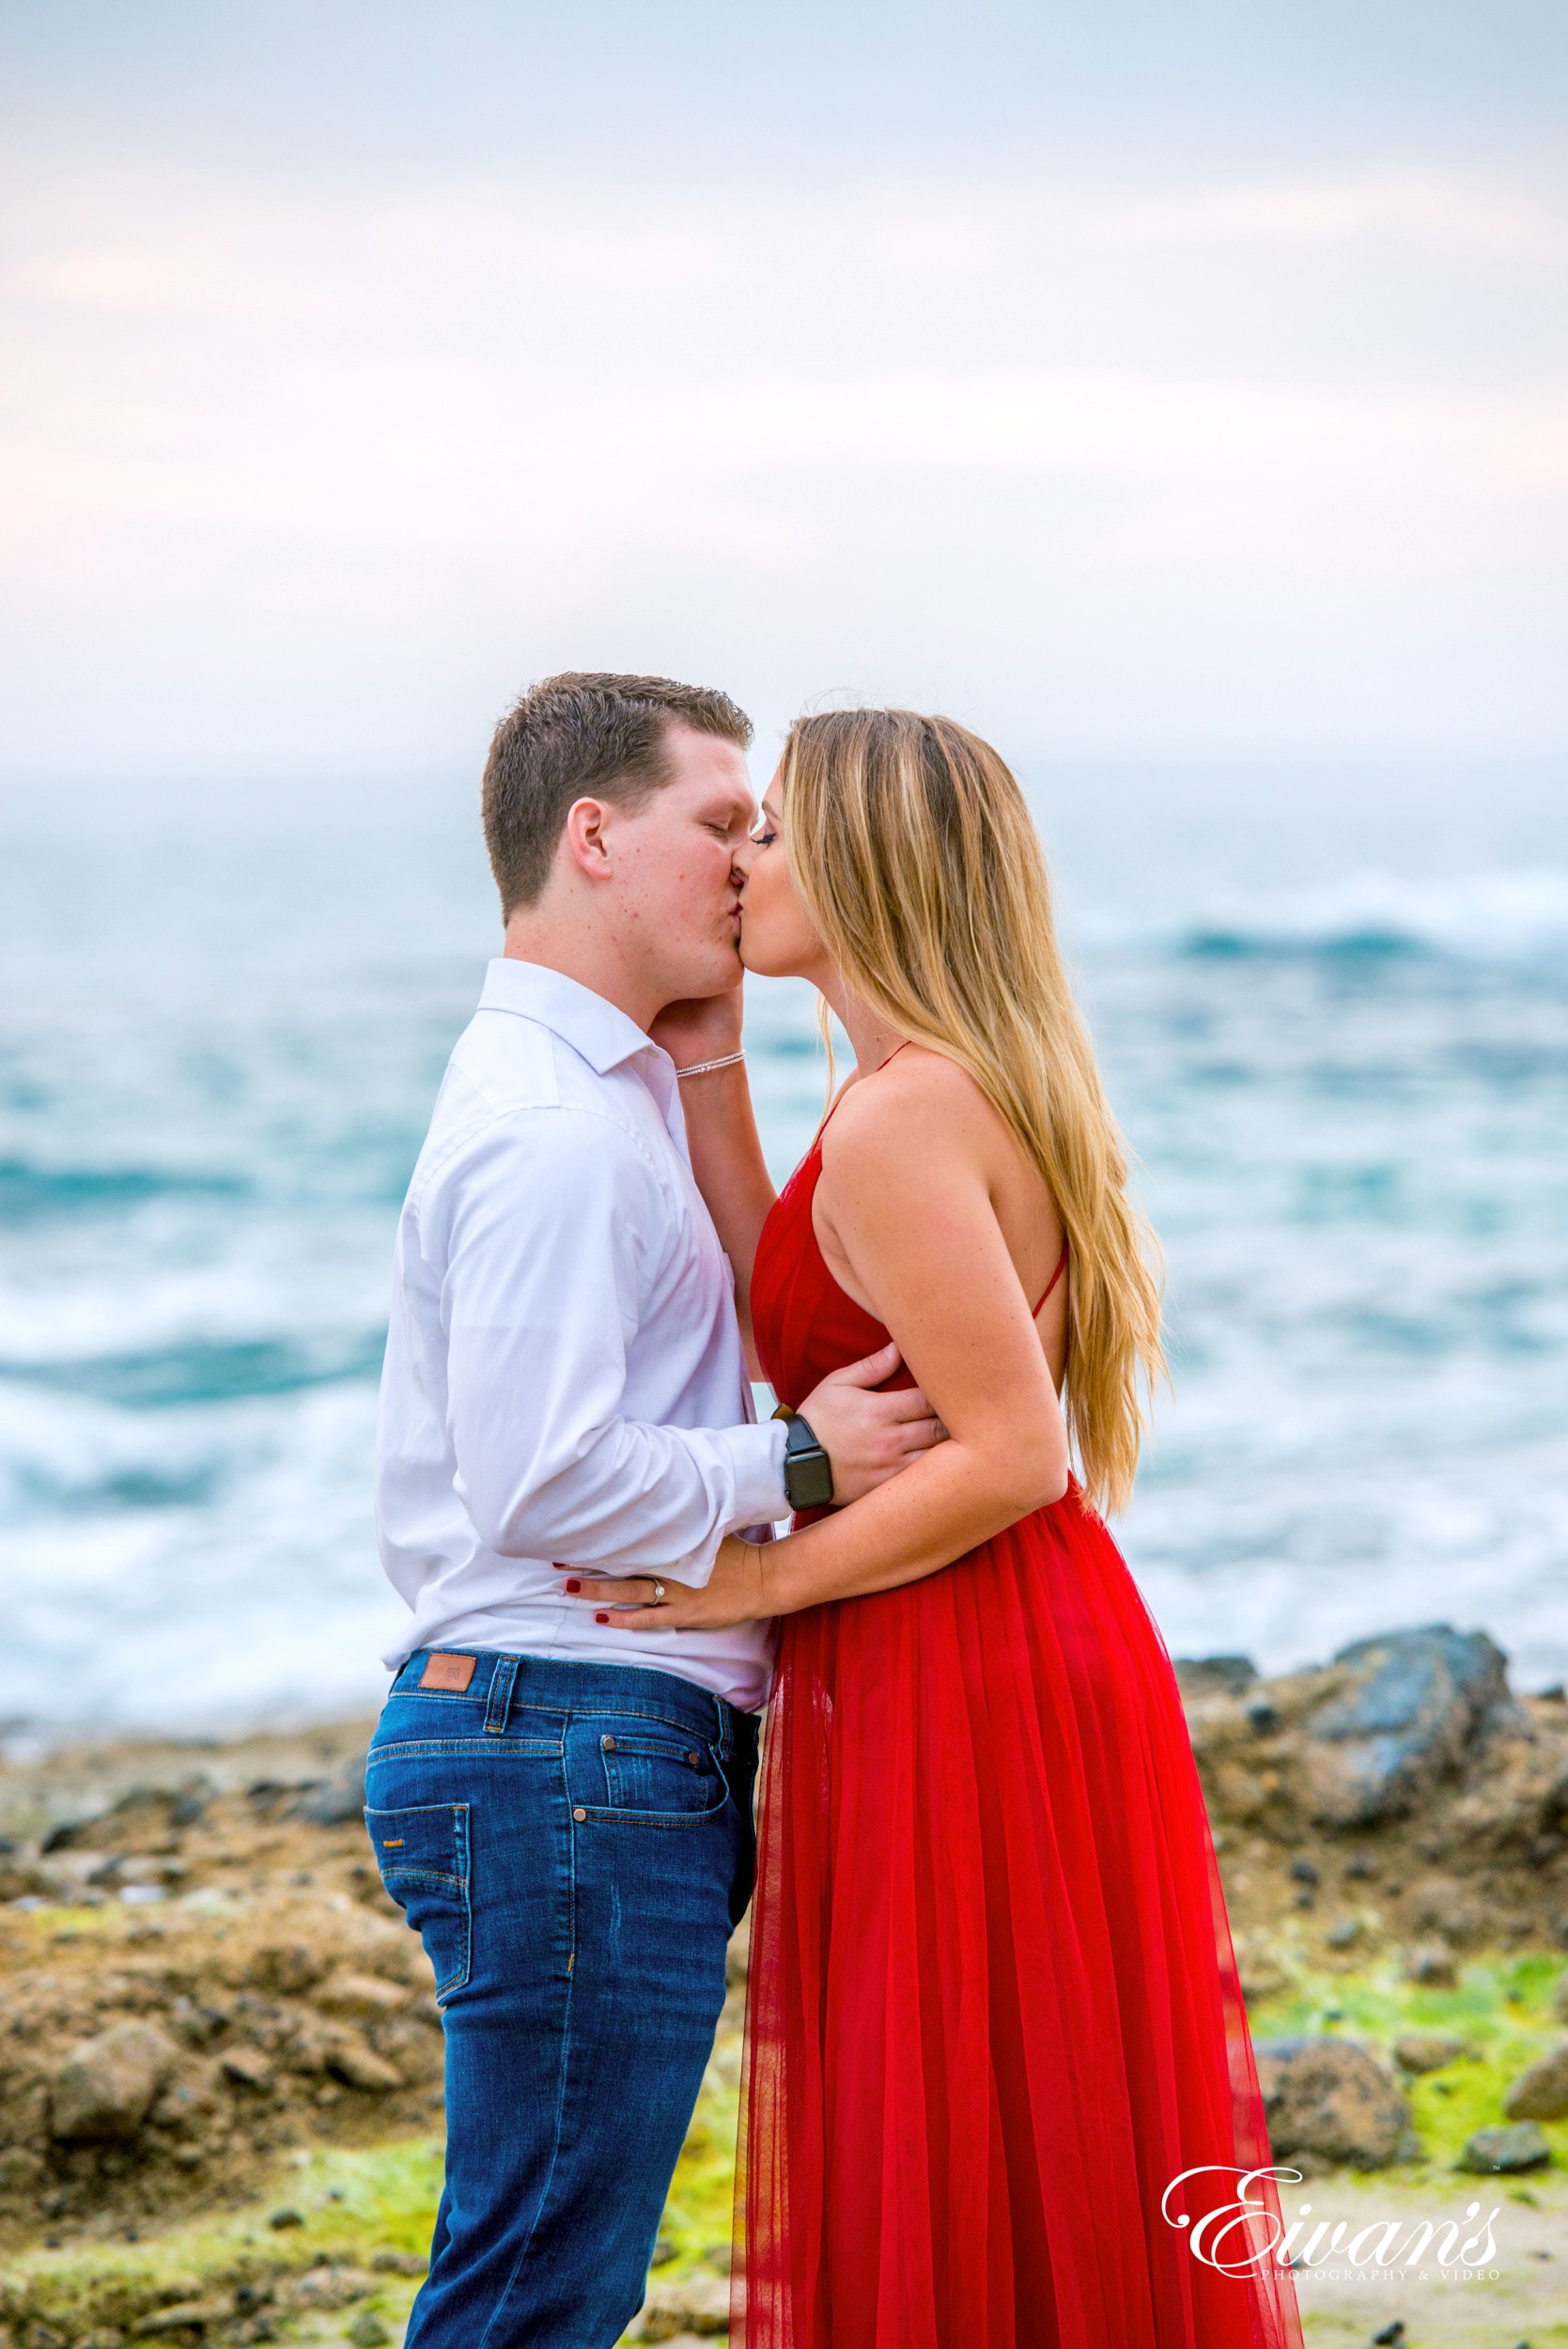 man and woman kissing on beach during daytime